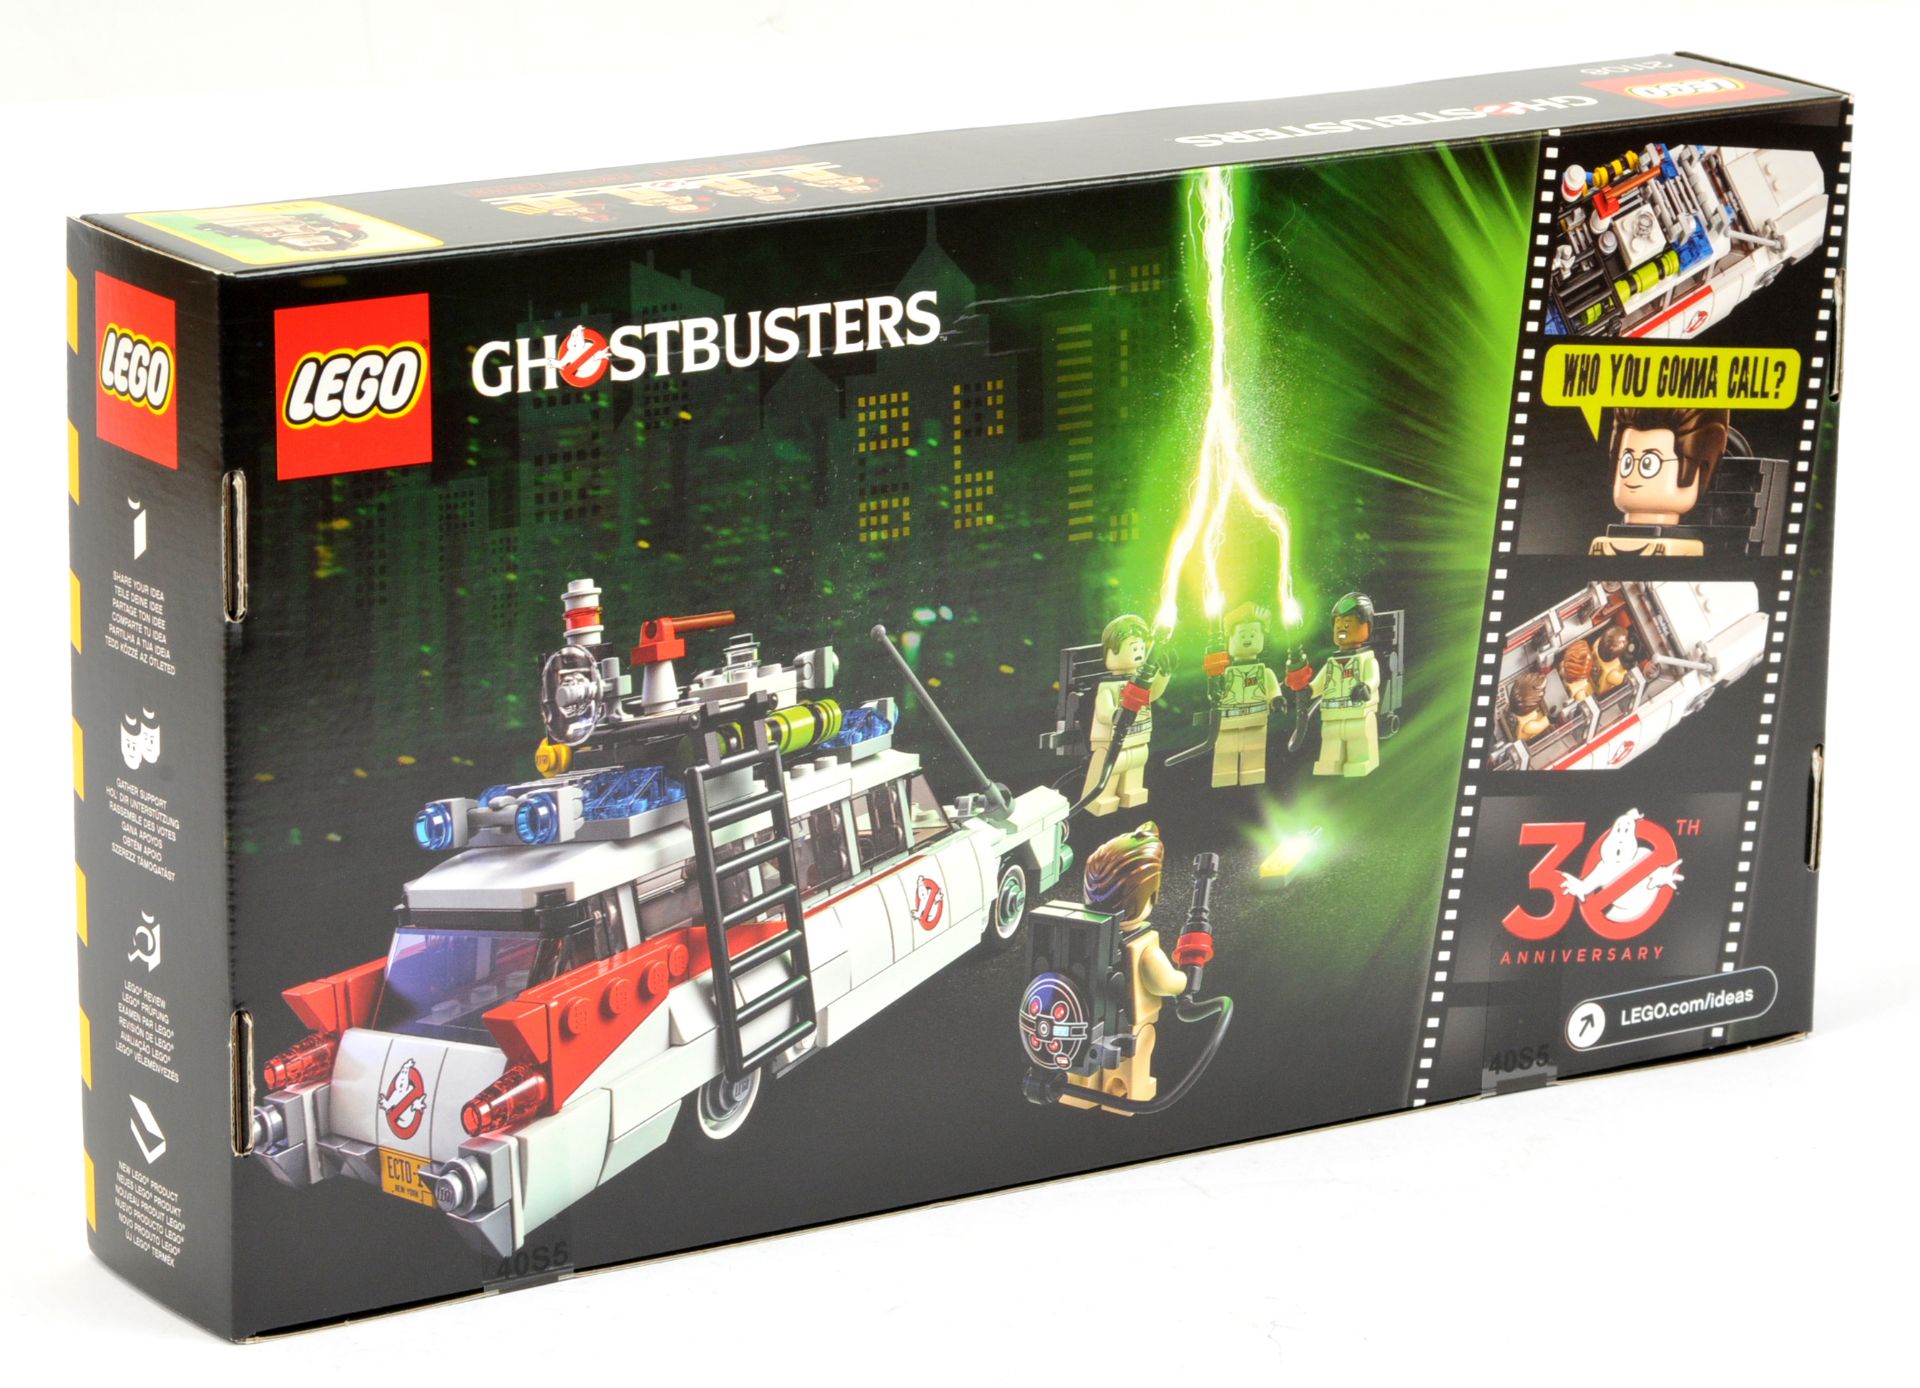 Lego 21108 Ghostbusters Ecto-1 within Excellent Plus sealed packaging (light crease on one corner). - Image 2 of 2